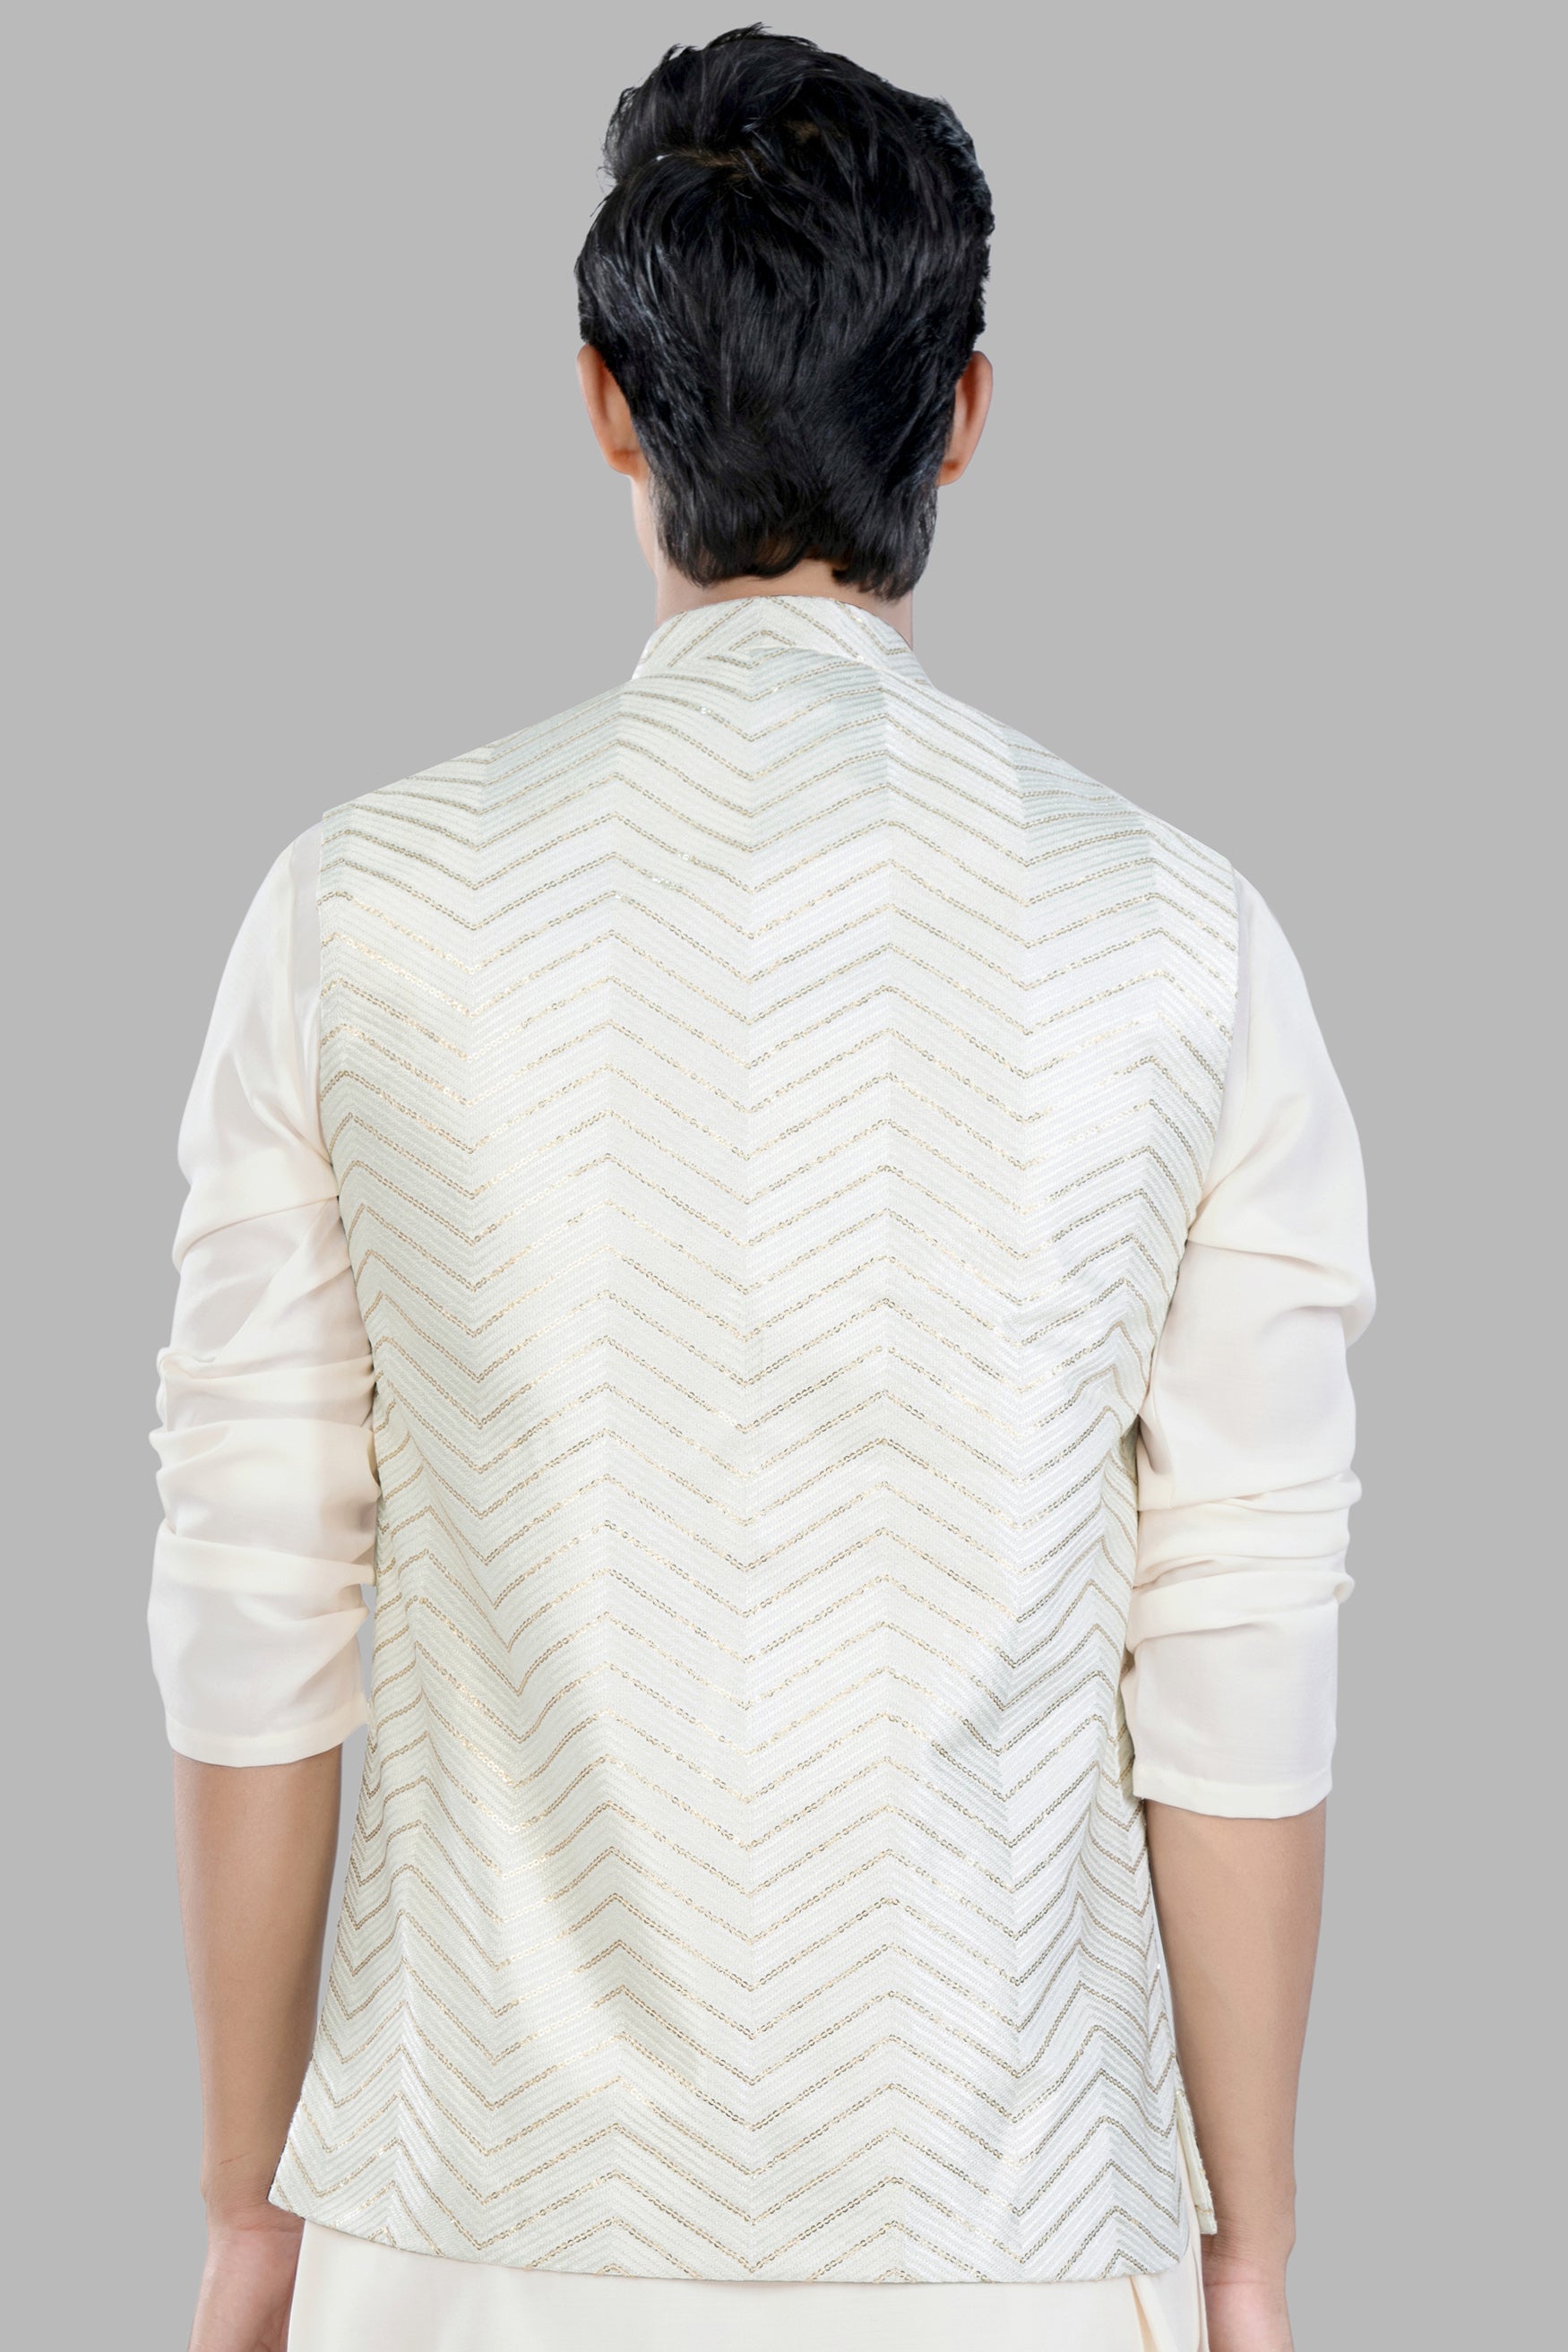 Bright White Chevron Sequin and Thread Embroidered Designer Nehru Jacket WC3472-36,  WC3472-38,  WC3472-40,  WC3472-42,  WC3472-44,  WC3472-46,  WC3472-48,  WC3472-50,  WC3472-52,  WC3472-54,  WC3472-56,  WC3472-58,  WC3472-60